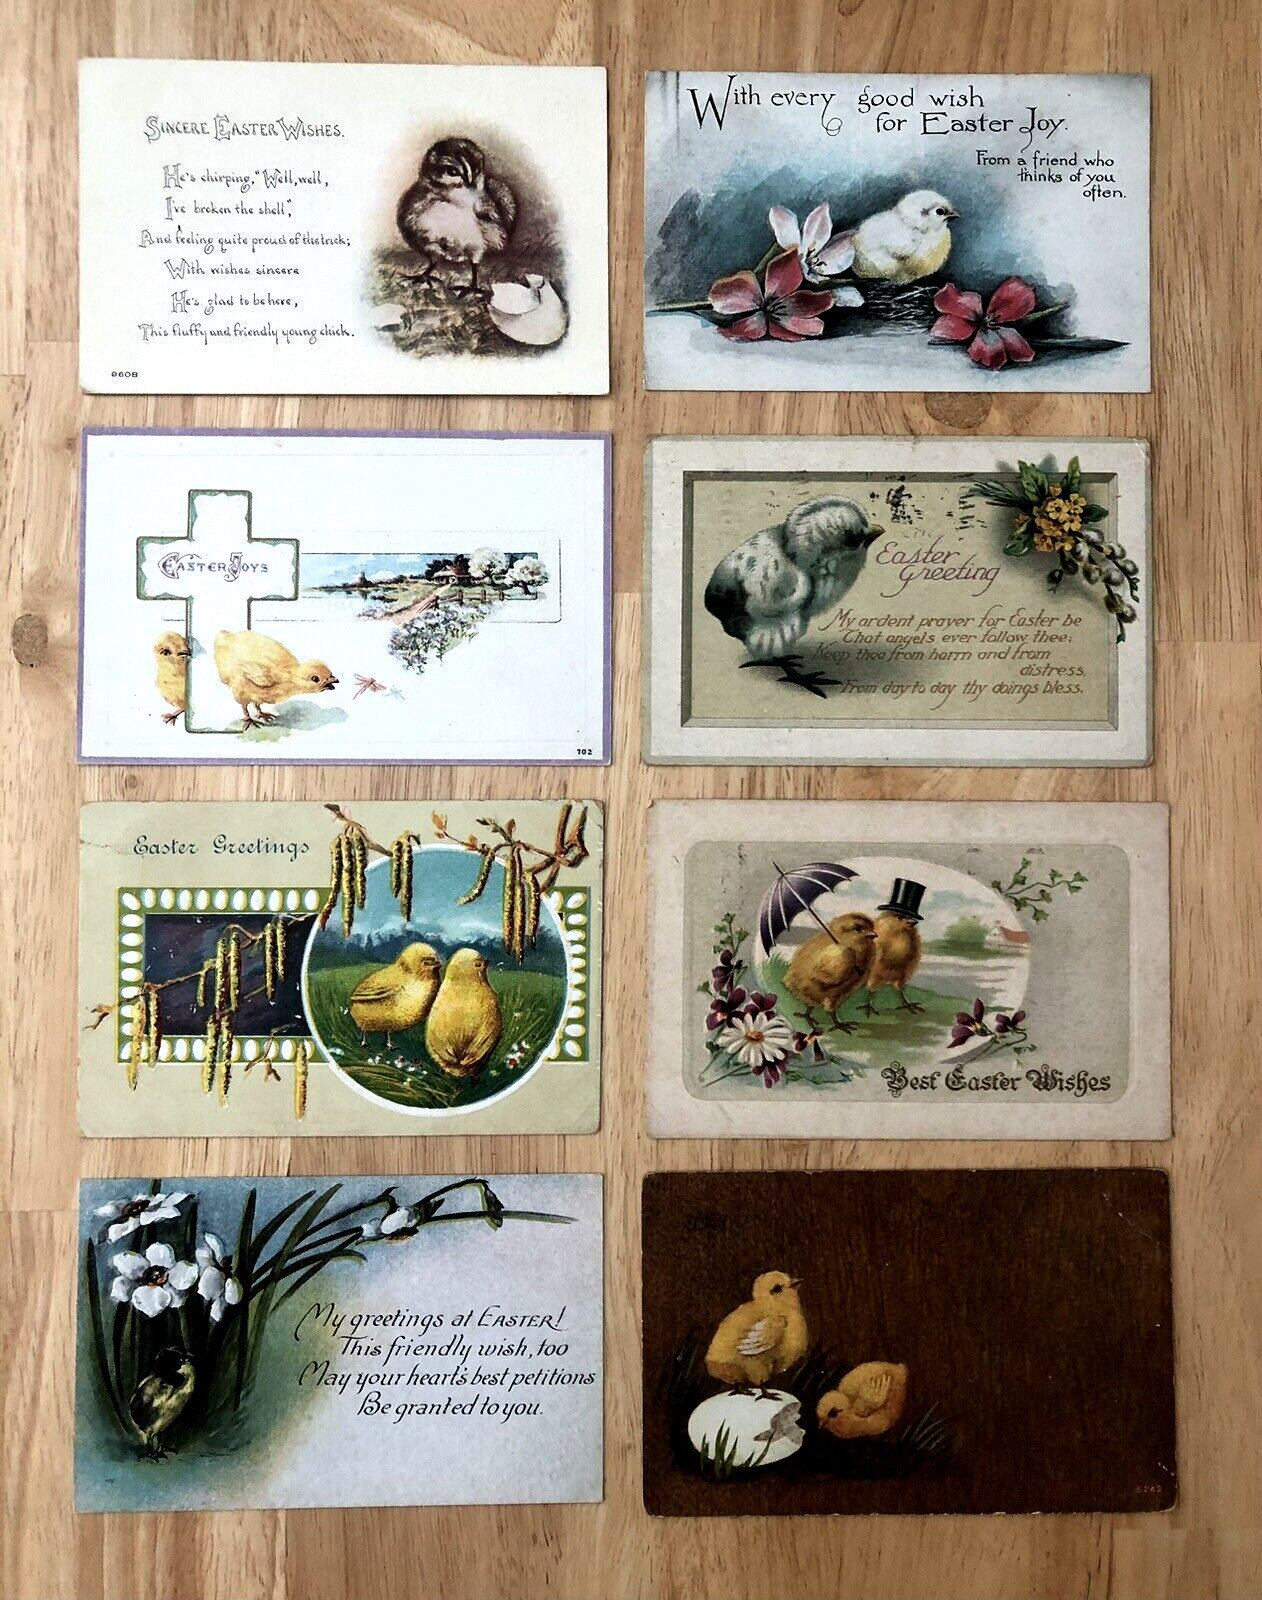 ANTIQUE EARLY 1900s LOT OF 8 EASTER CHICK POSTCARDS - 3 WITH 1 CENT STAMPS